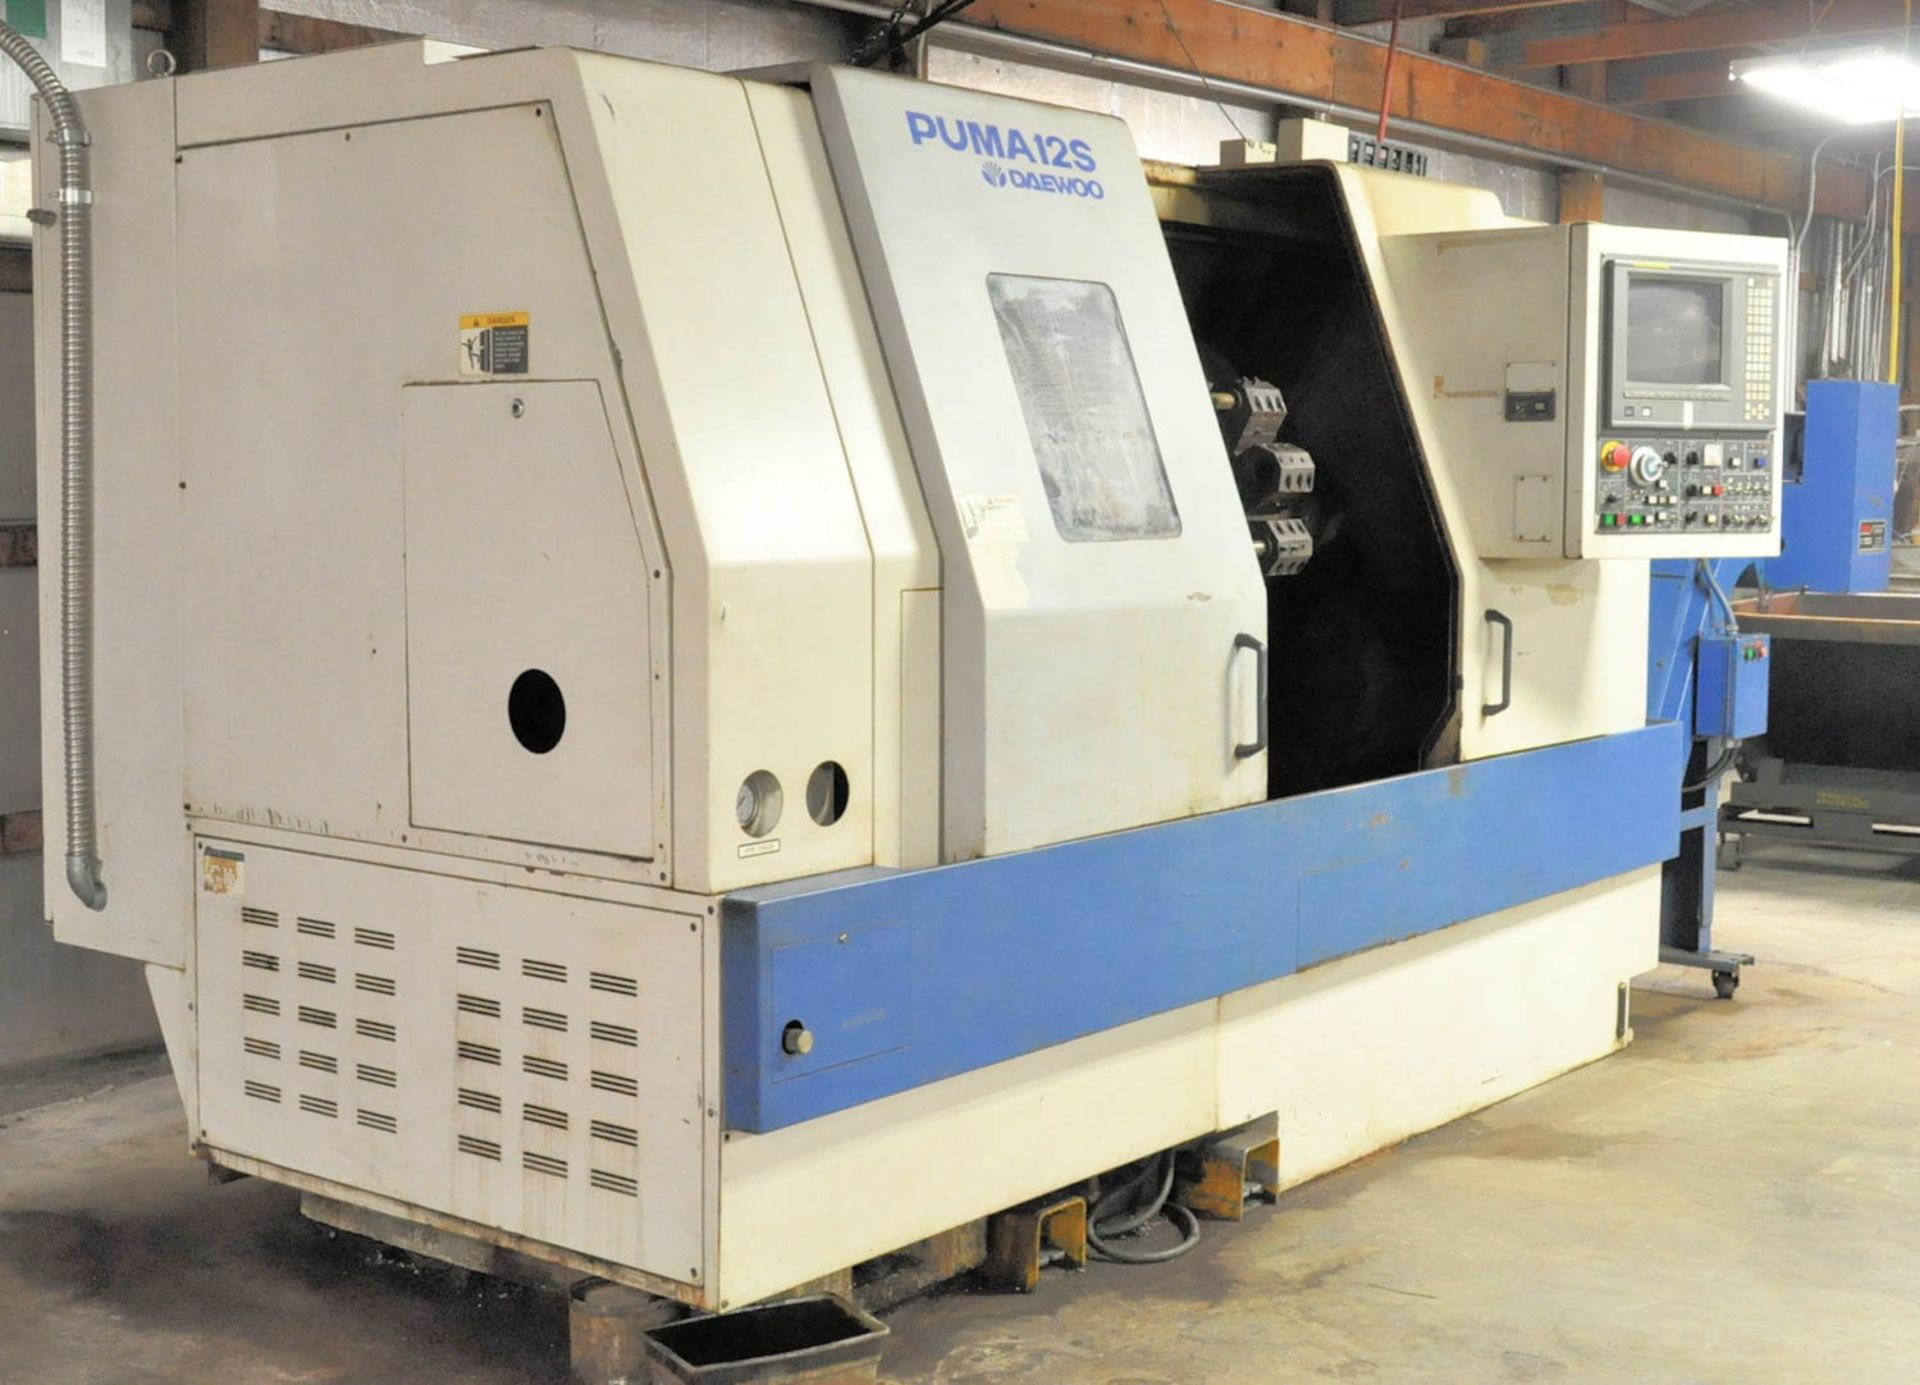 DAEWOO PUMA MDL. 12S LATHE, WITH FANUC SERIES 18-T CNC CONTROLLER, 3" THRU SPINDLE, 18" X 30" - Image 7 of 9